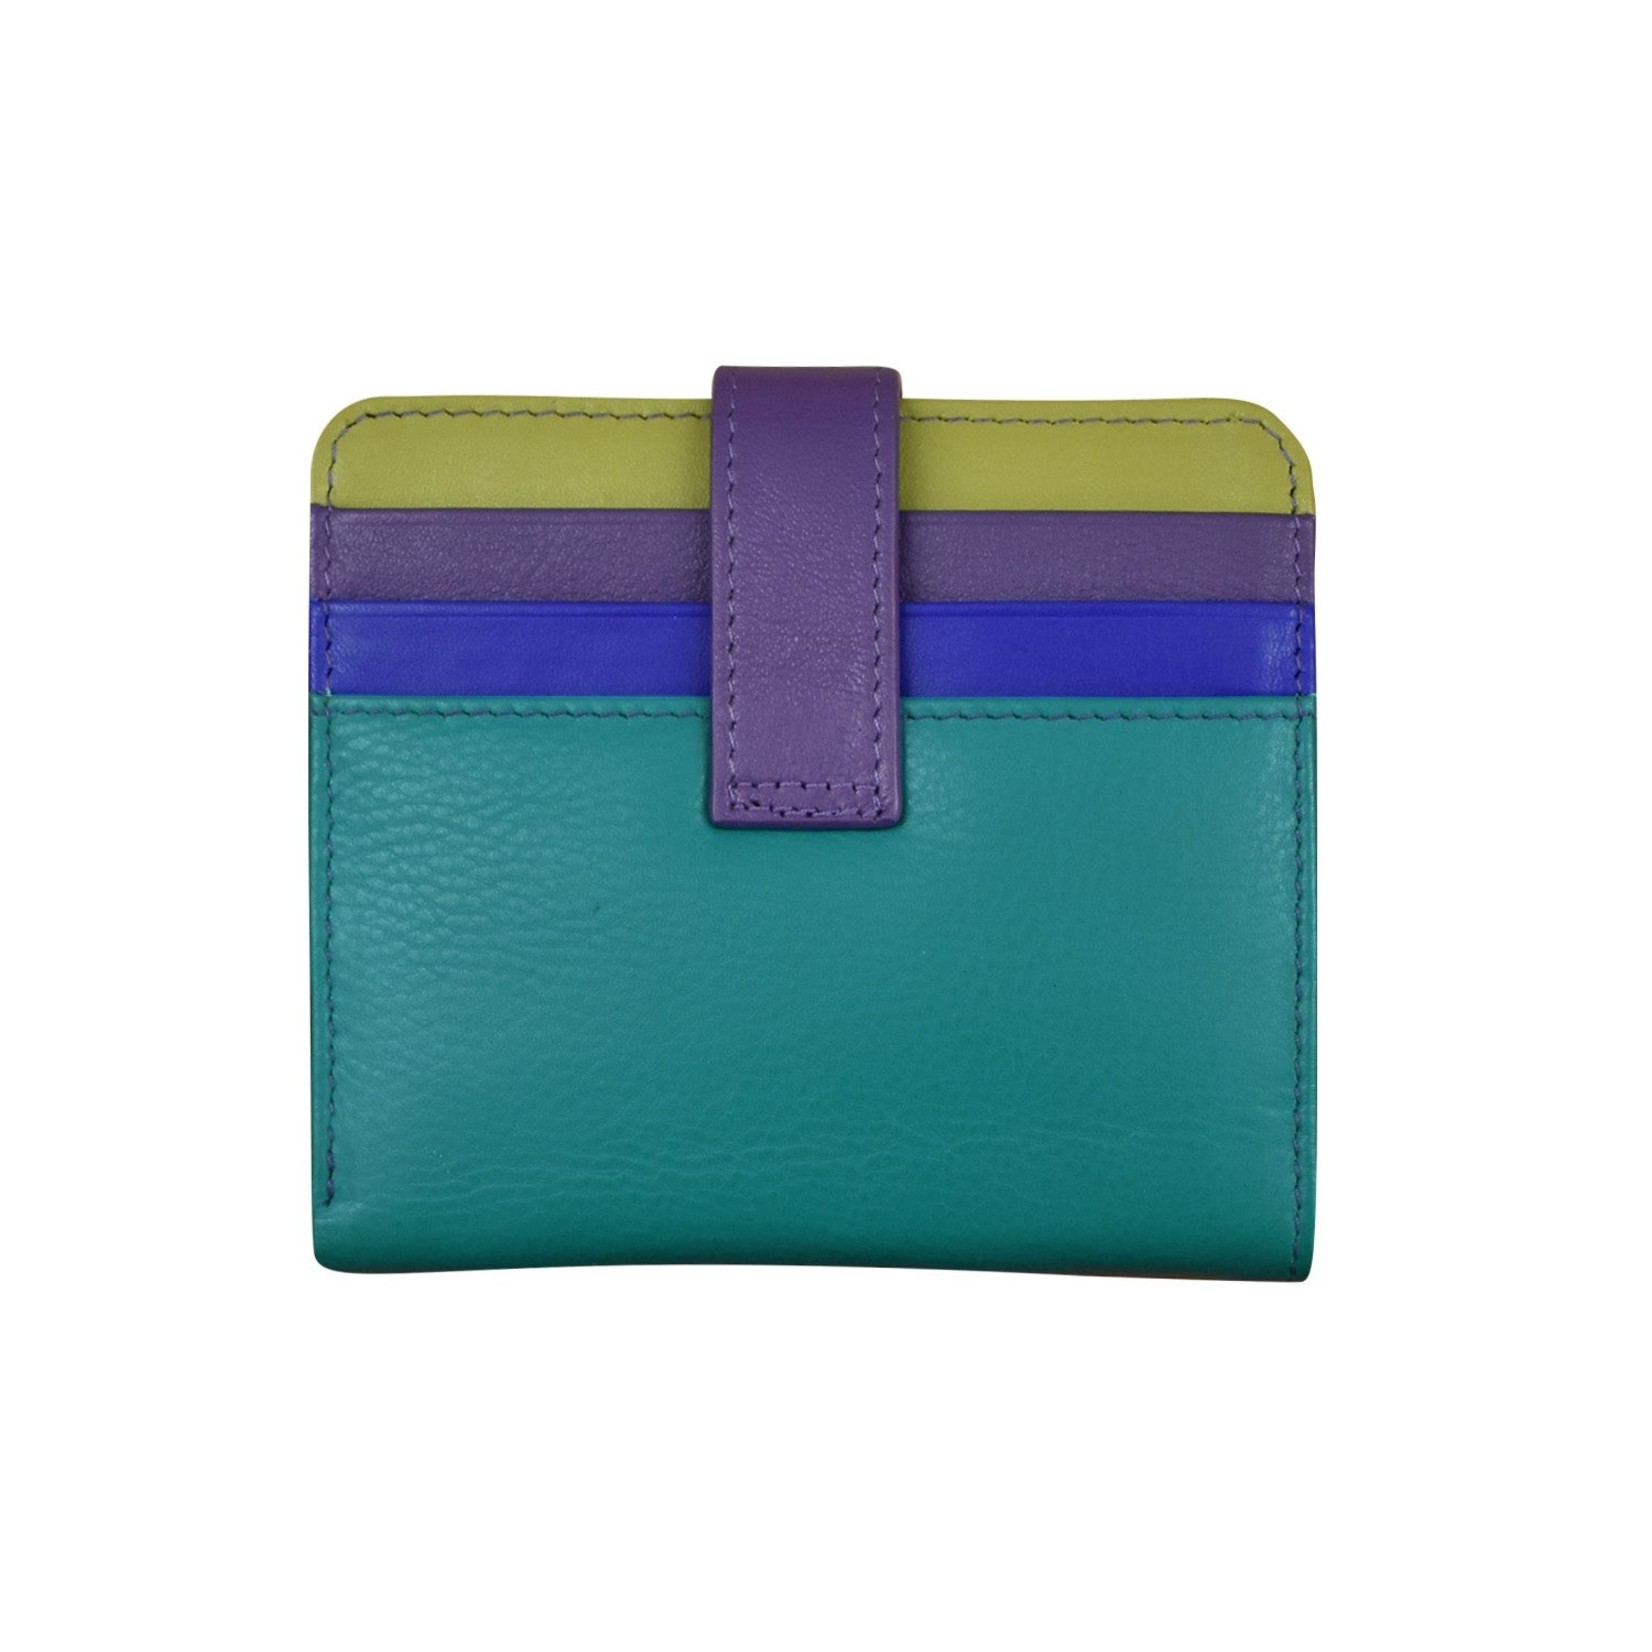 Leather Handbags and Accessories 7301 Cool Tropics - RFID Small Wallet